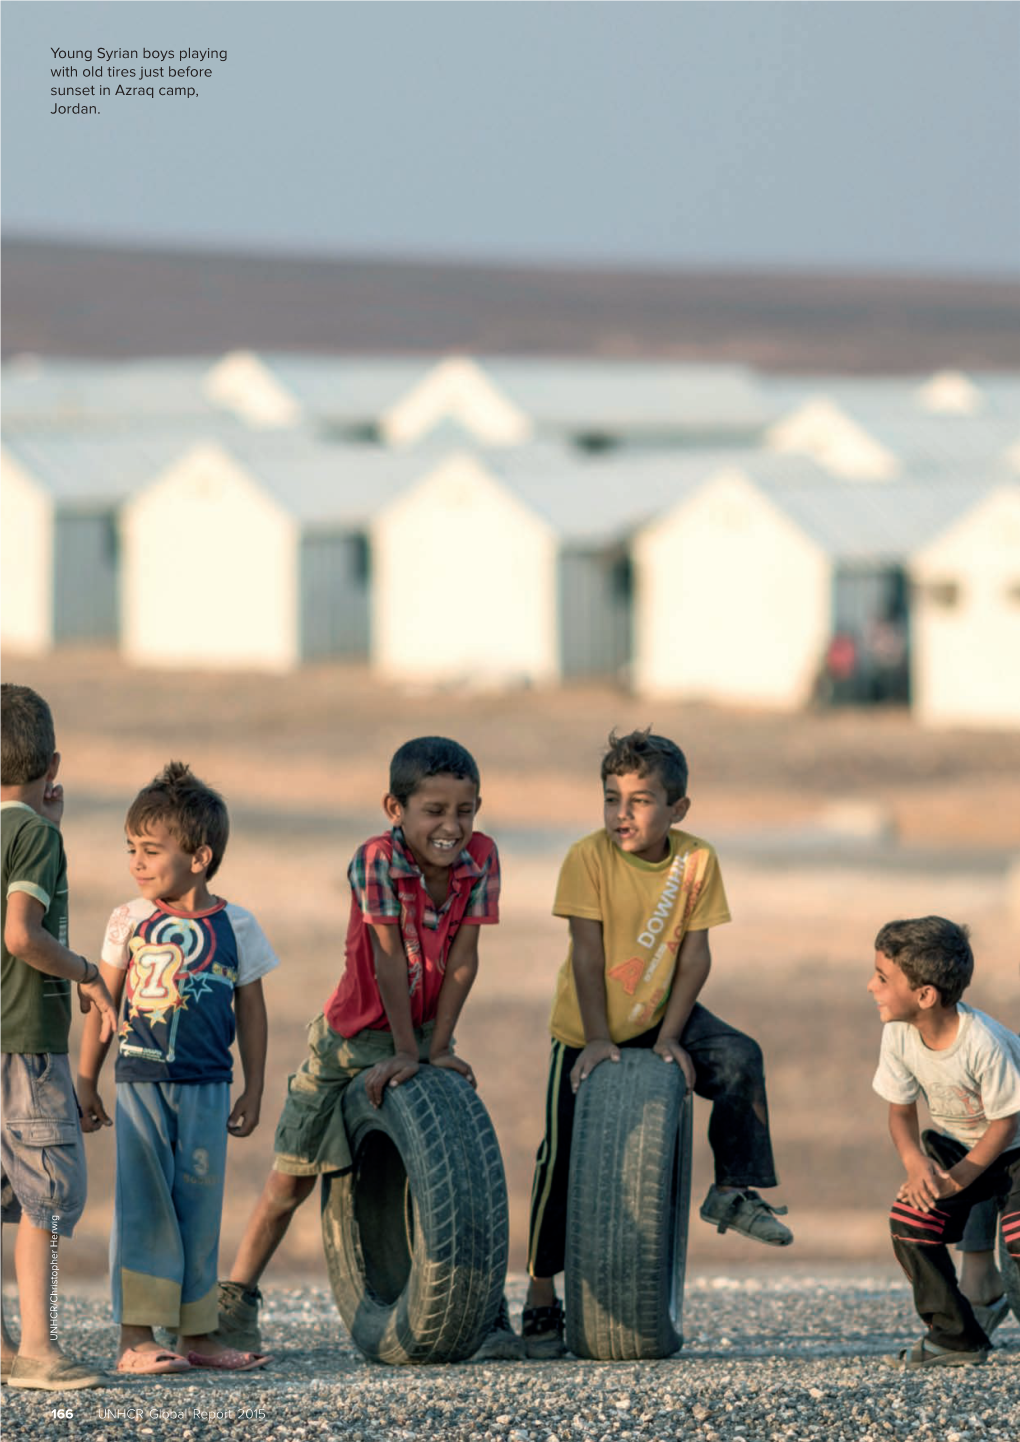 Young Syrian Boys Playing with Old Tires Just Before Sunset in Azraq Camp, Jordan